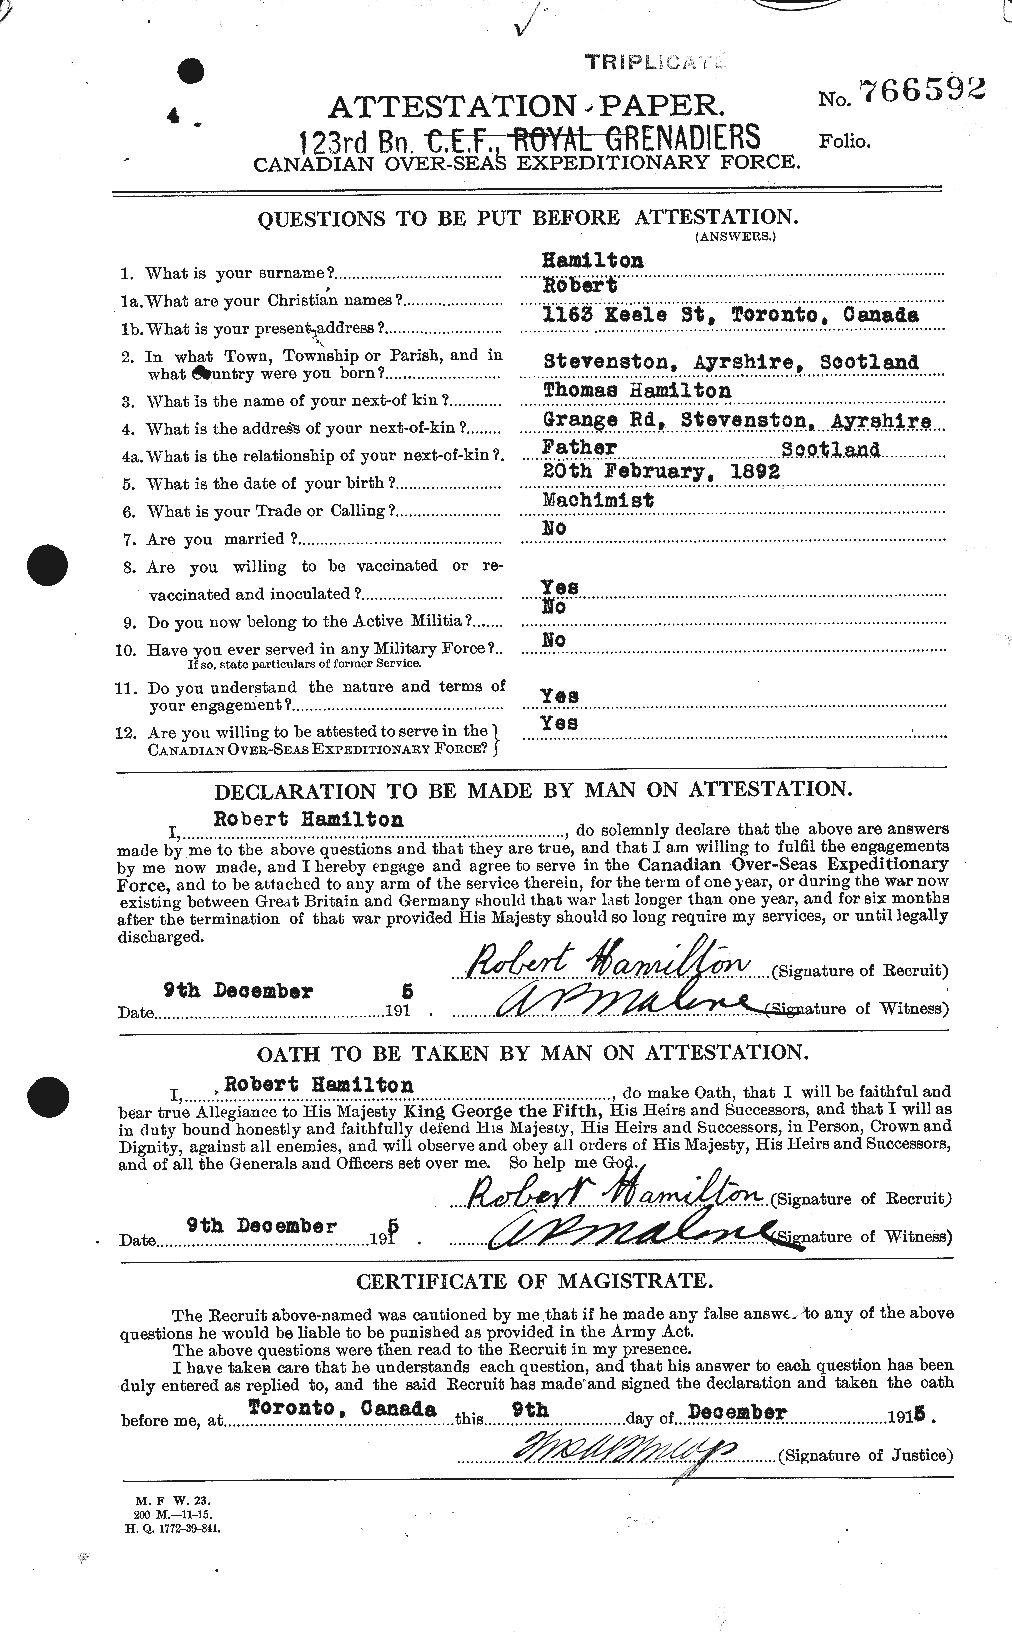 Personnel Records of the First World War - CEF 373227a